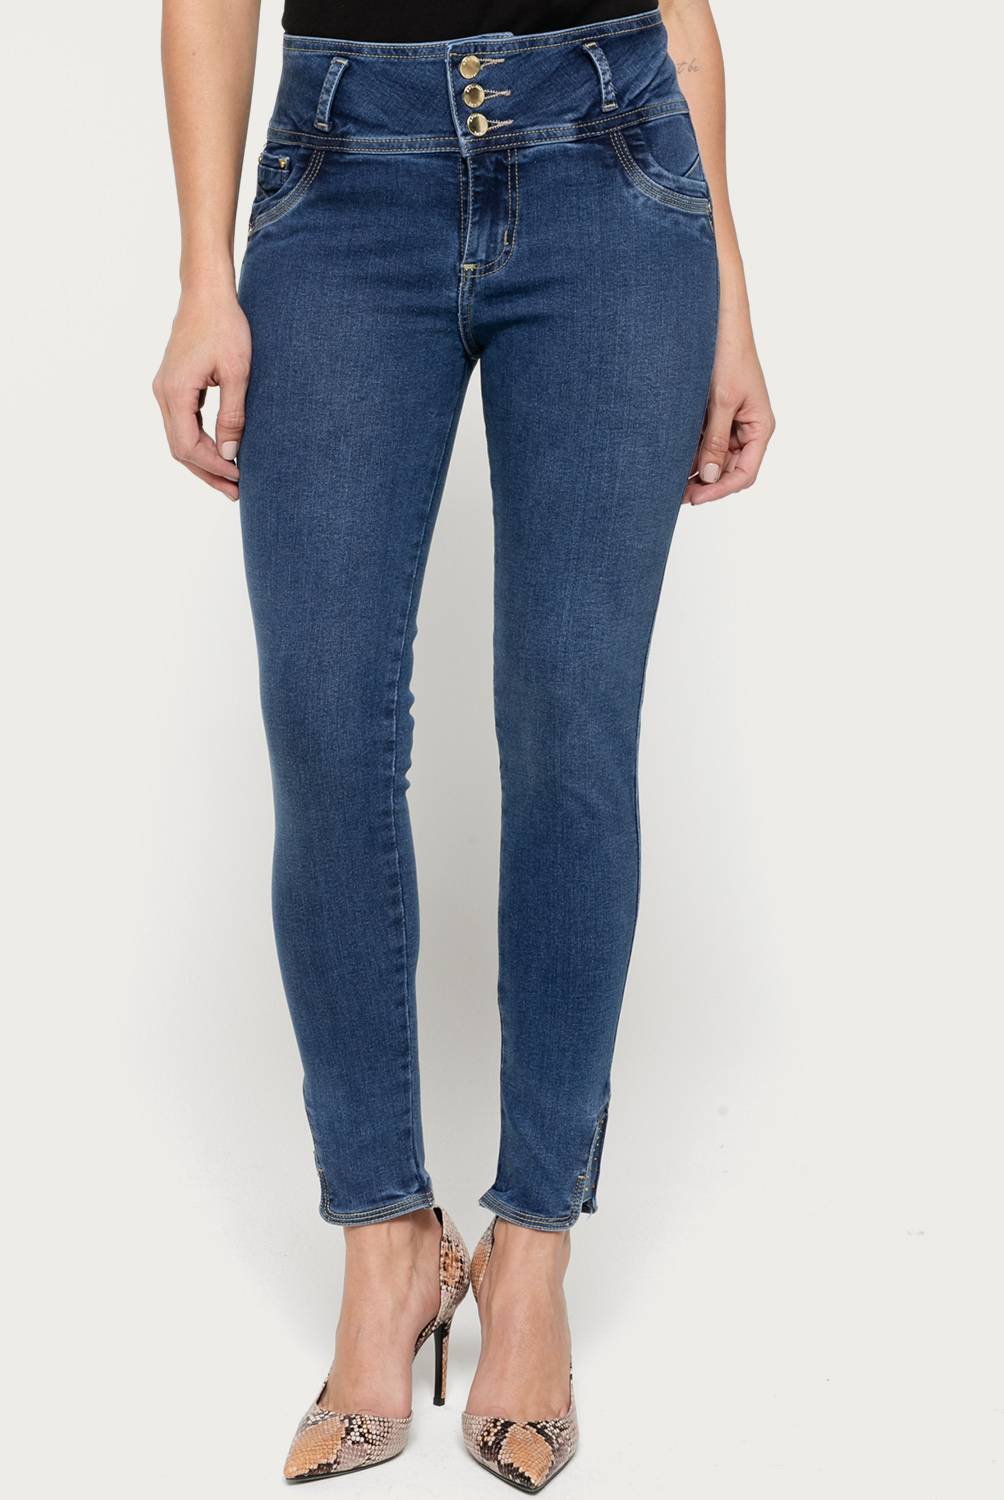 APOLOGY - Jeans Mujer Curvy UP